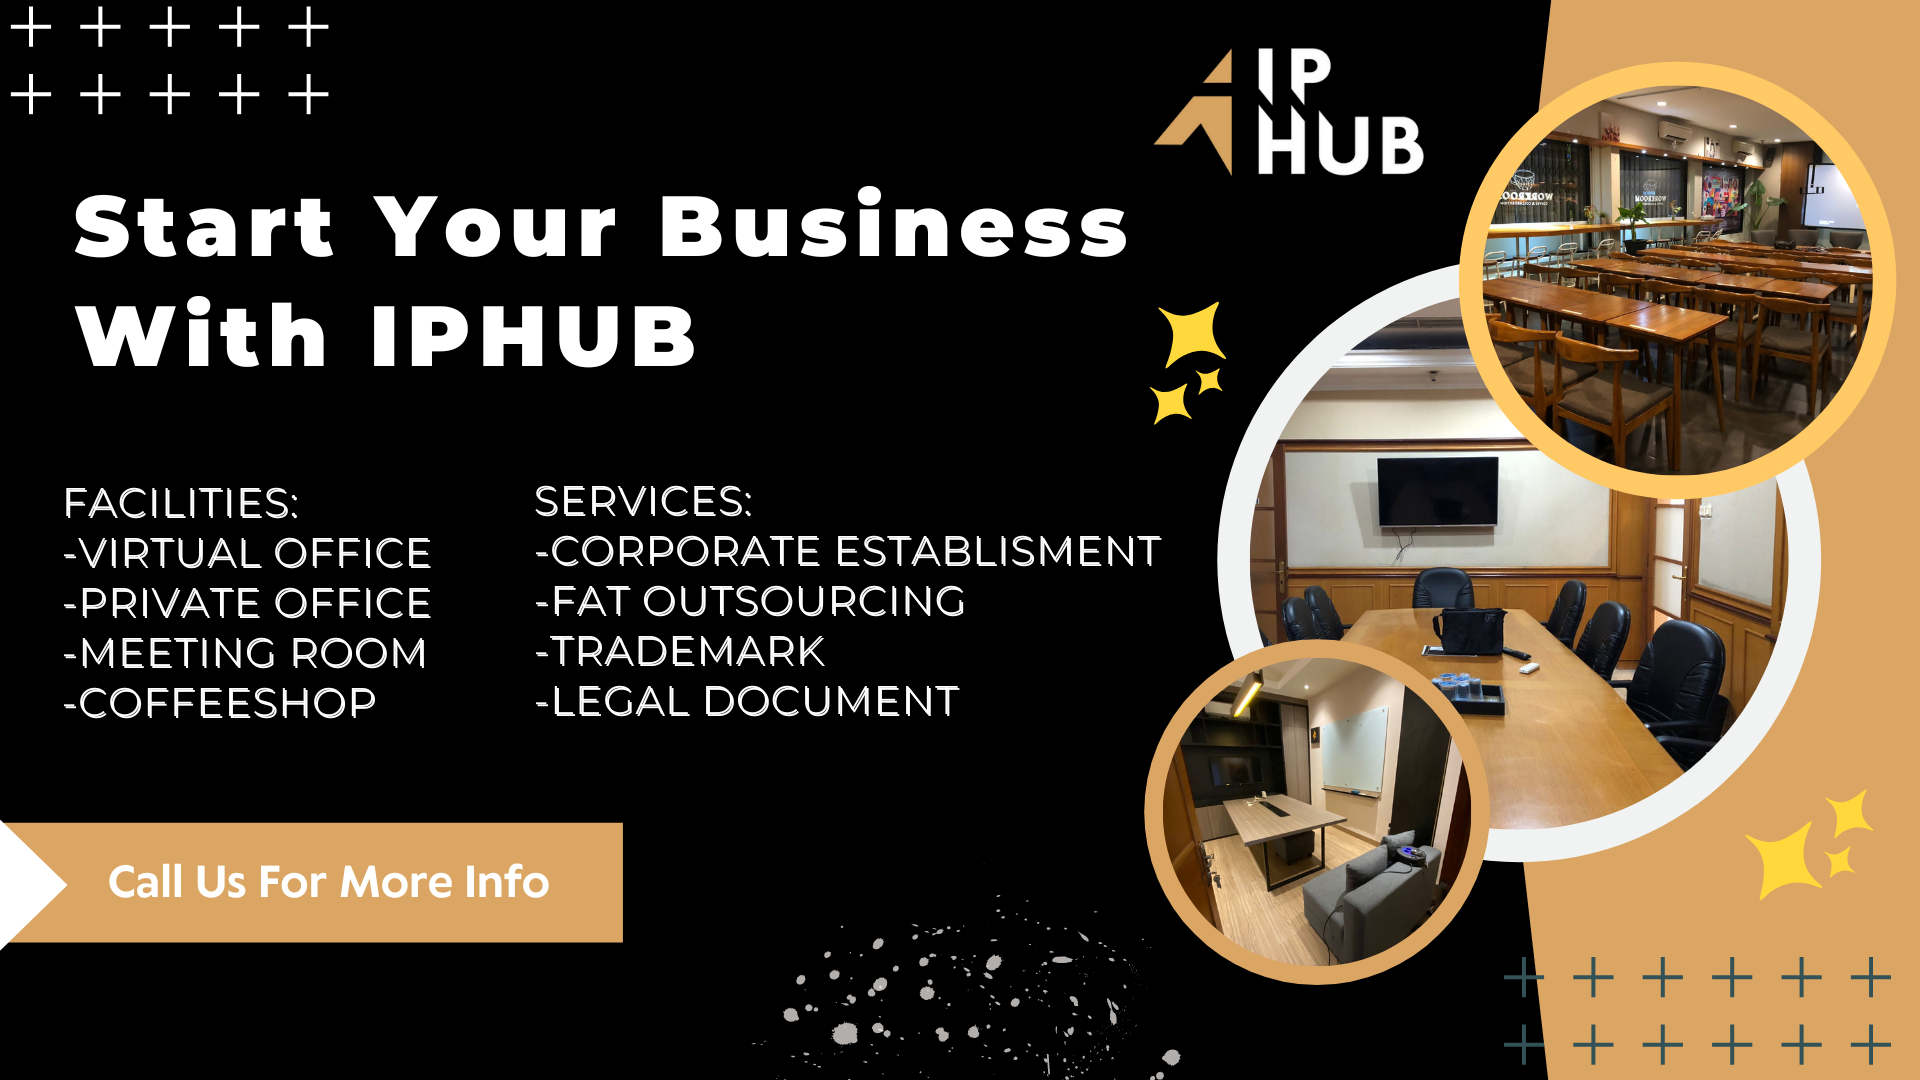 <h3><b>STARTS YOUR BUSINESS&nbsp;<span style="color: rgb(247, 247, 247);">WITH IPHUB.</span></b></h3>